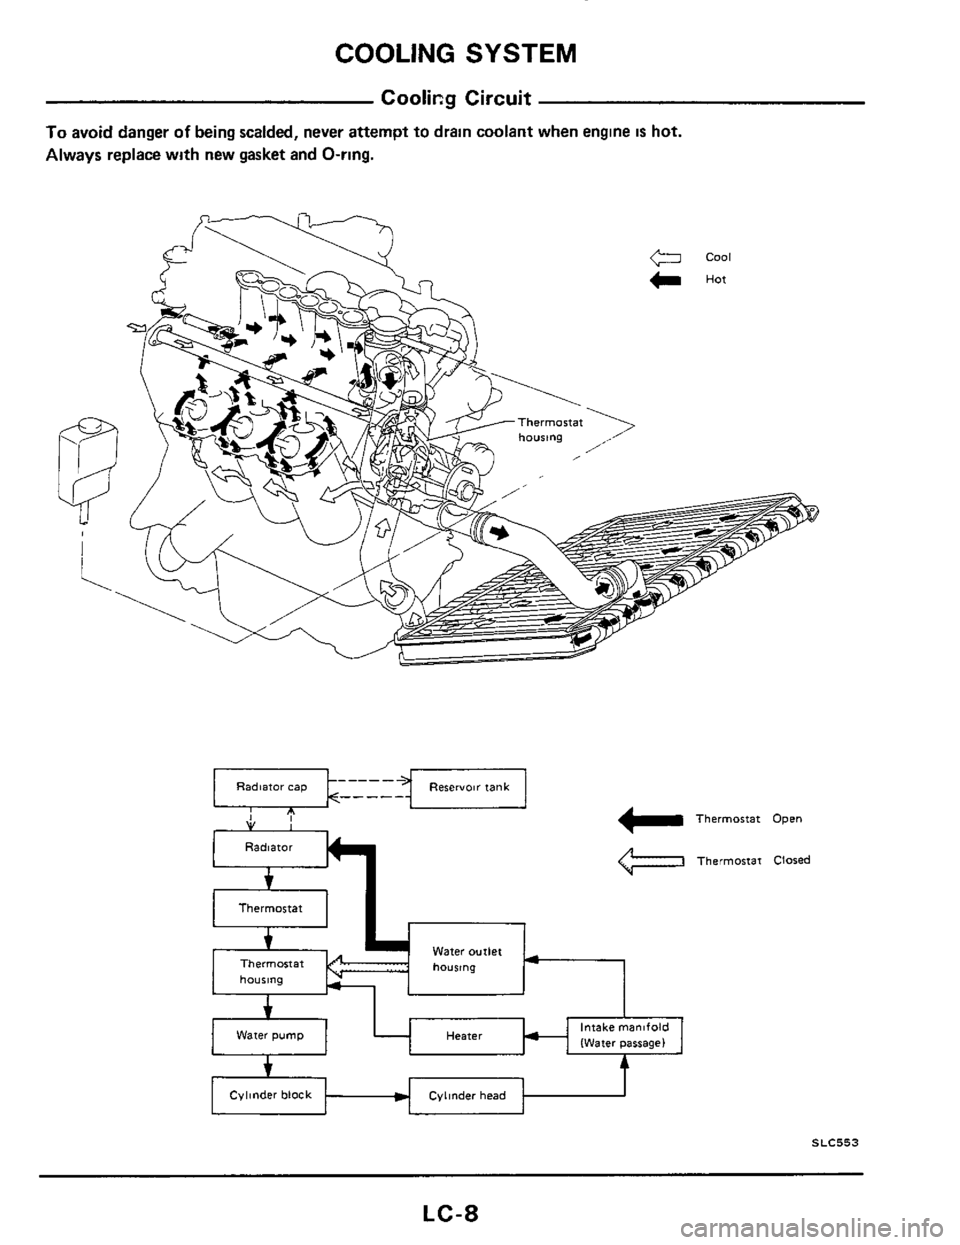 NISSAN 300ZX 1984 Z31 Engine Lubrication And Cooling System Workshop Manual COOLING SYSTEM 
Coolicg Circuit 
To avoid danger of being scalded,  never attempt  to drain  coolant  when engine is hot. 
Always  replace with new gasket  and O-ring. 
V 
Radlaror 
f 
+ - 
Thermostat